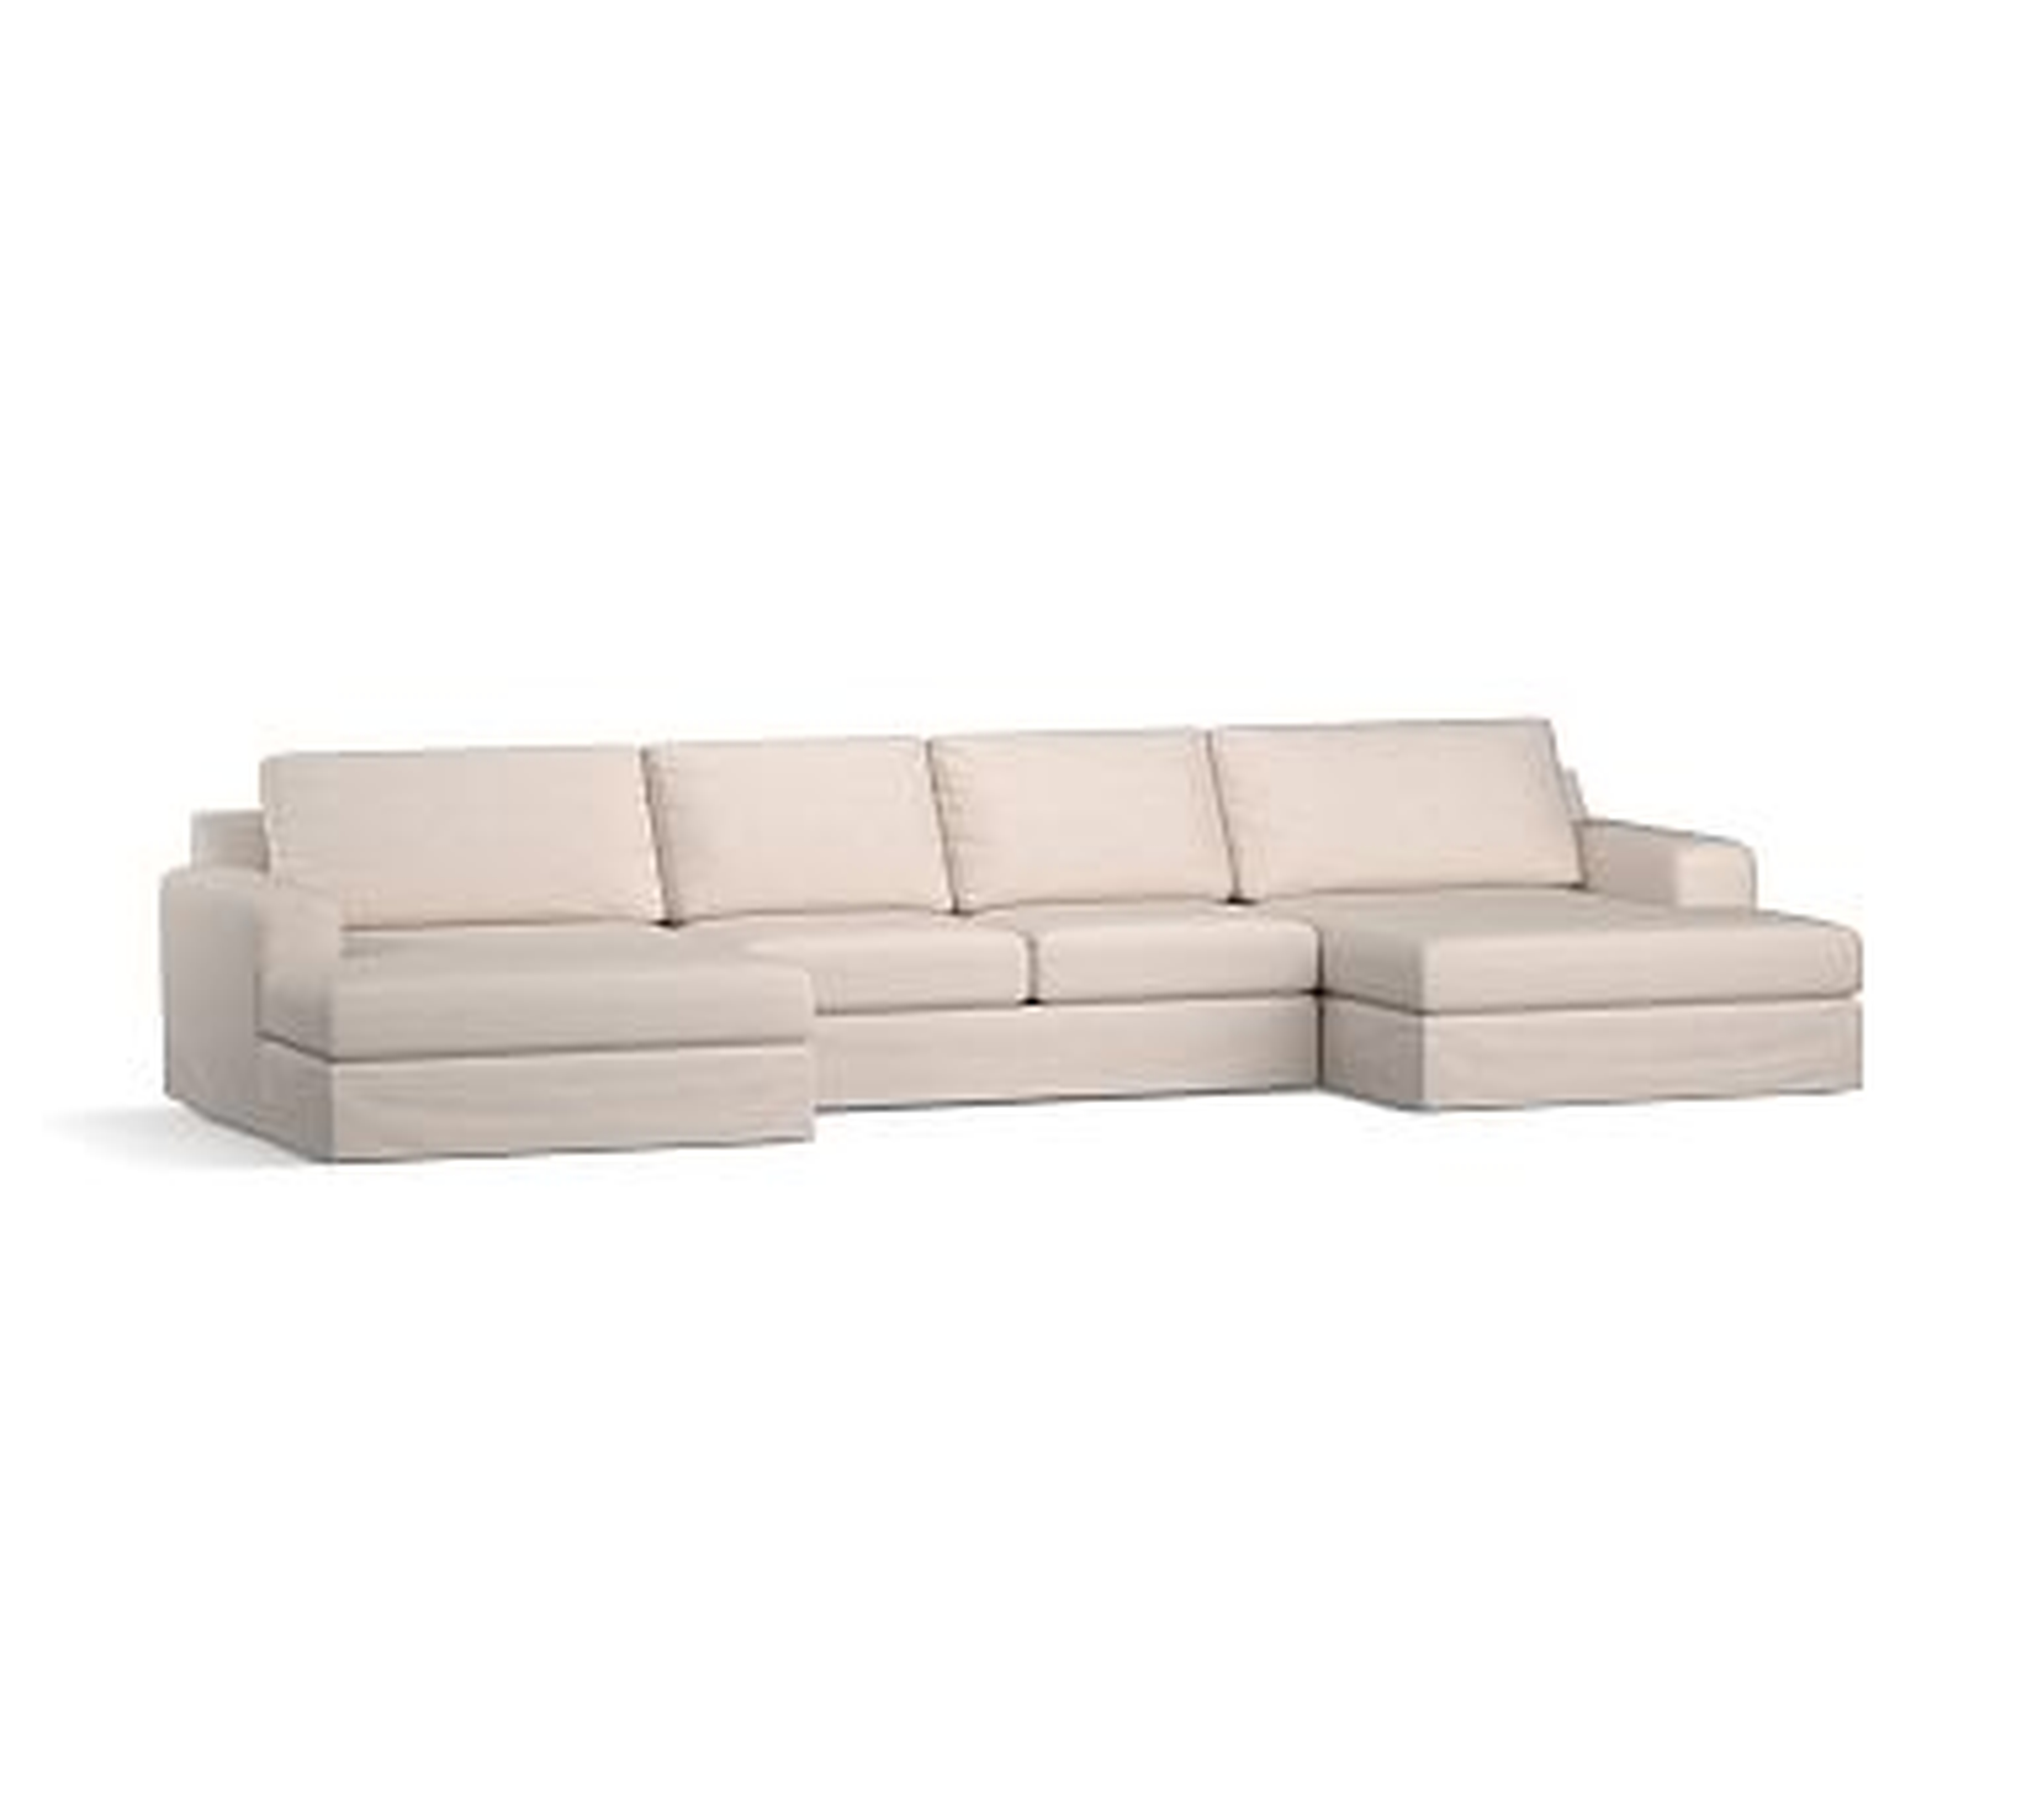 Big Sur Square Arm Slipcovered U-Double Chaise Sofa Sectional with Bench Cushion, Down Blend Wrapped Cushions, Denim Warm White - Pottery Barn